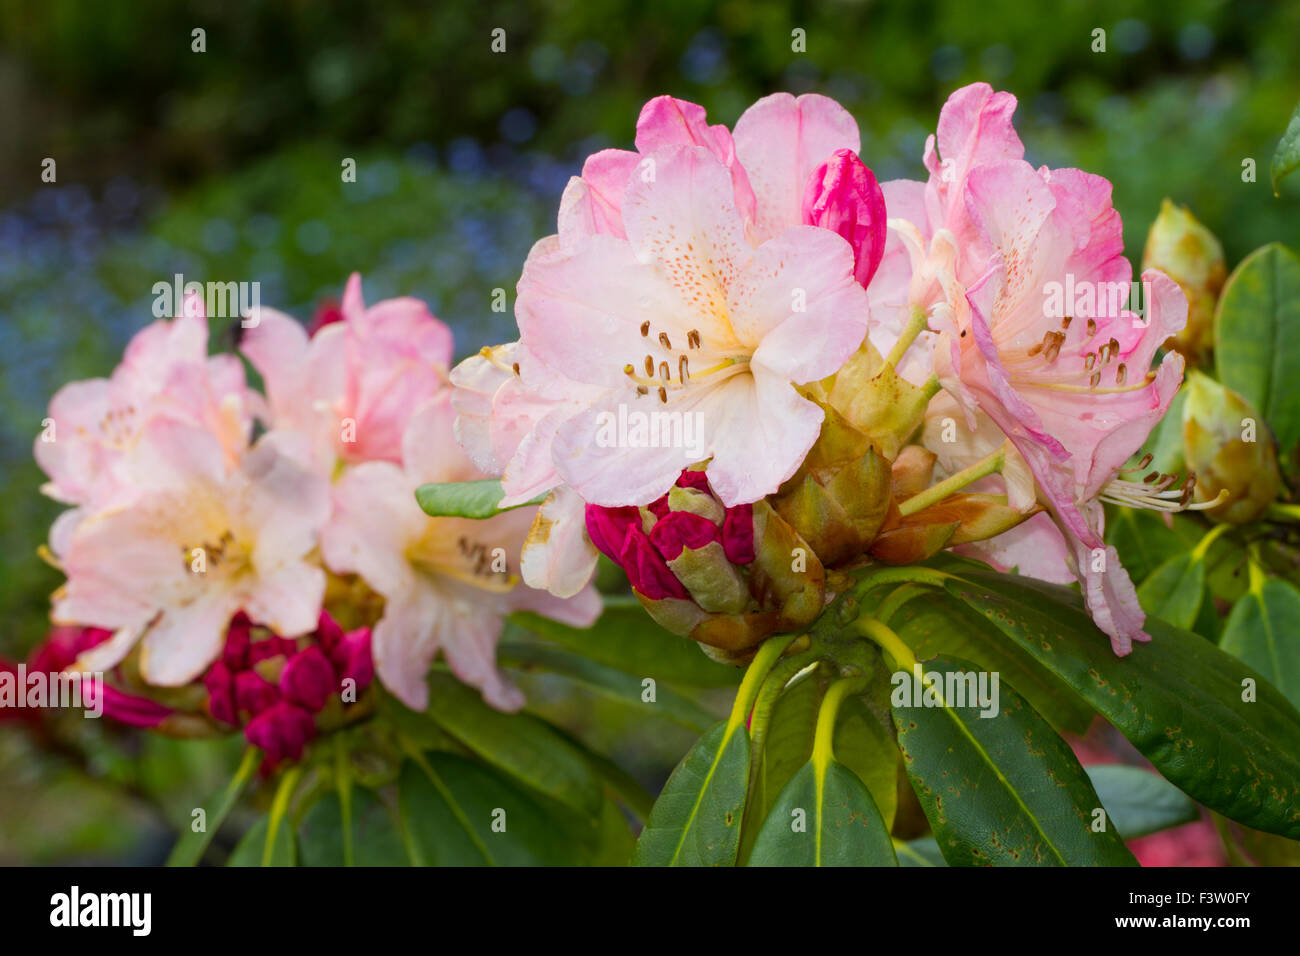 Flowers of a Rhododendron hybrid, variety 'Percy Wiseman' in a garden.  Powys, Wales. May. Stock Photo